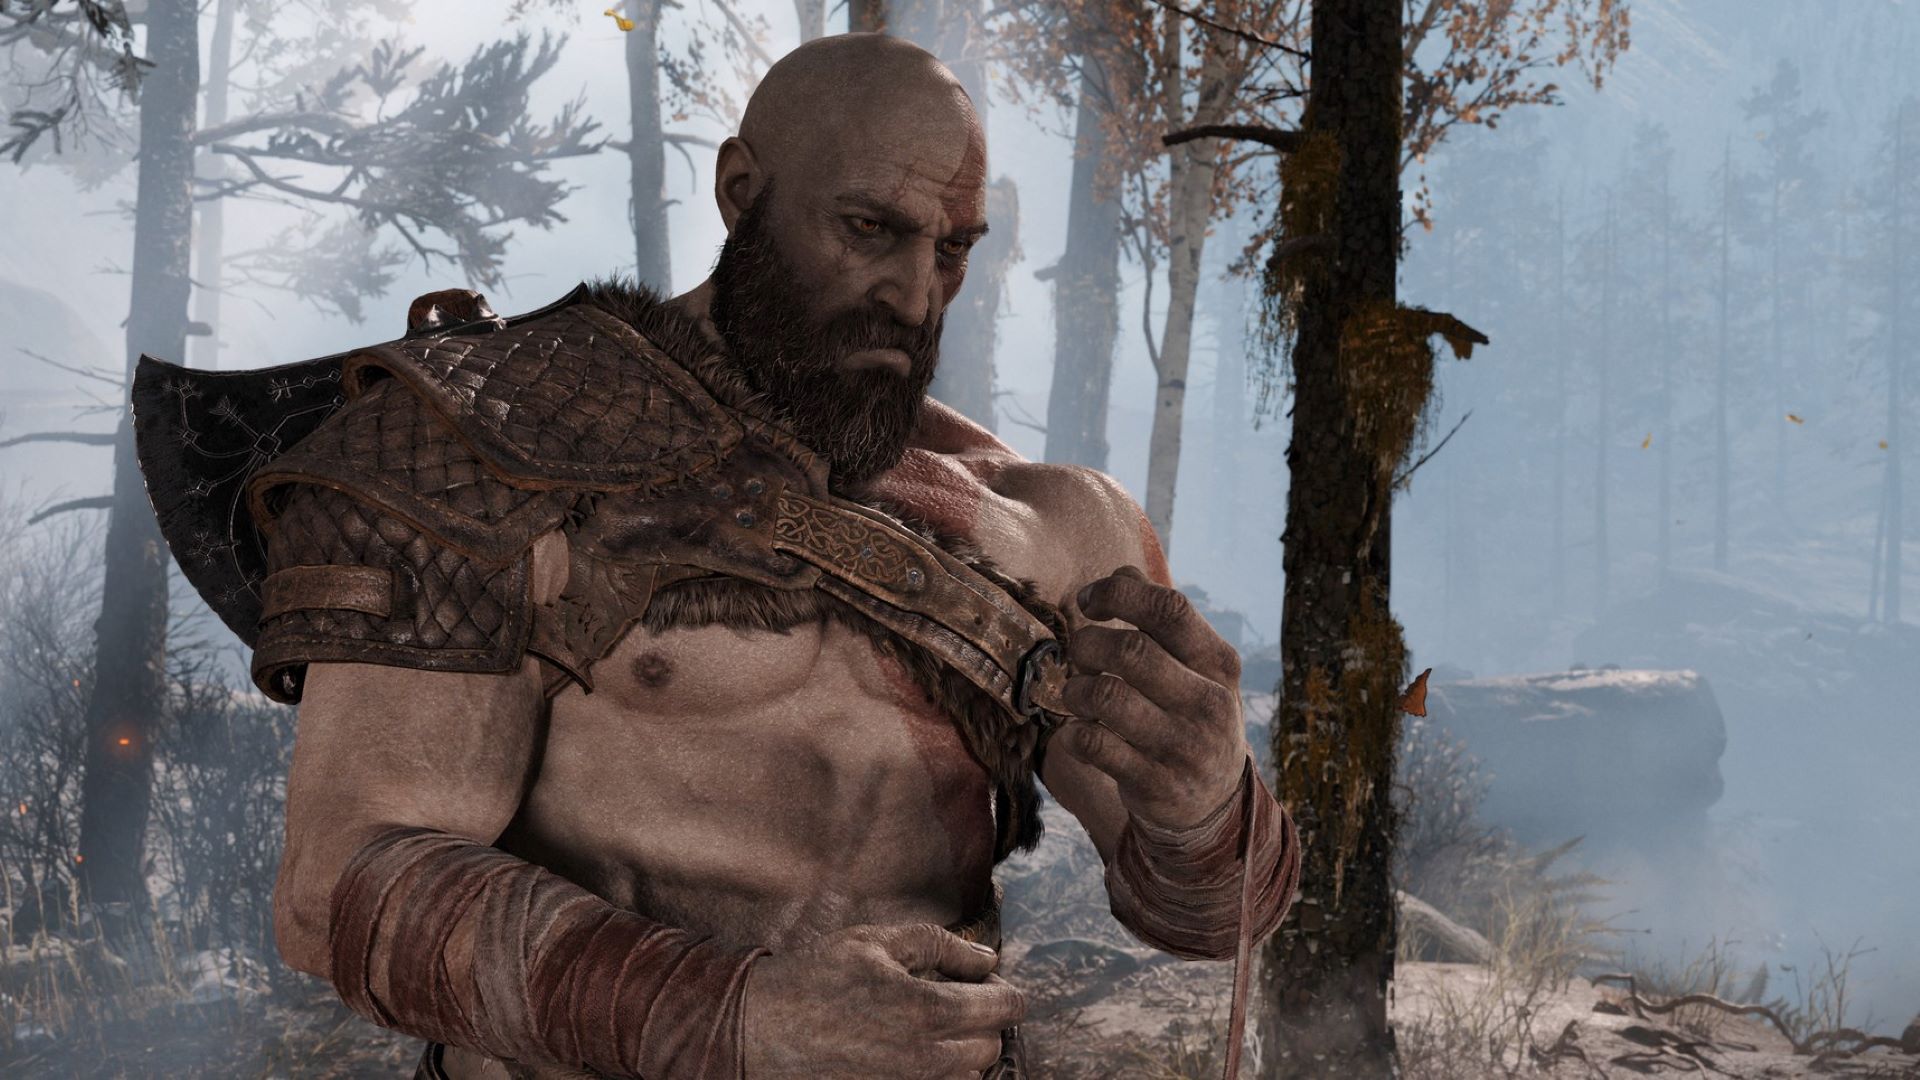 God of War PC requirements, Minimum, recommended, ultra & best specs